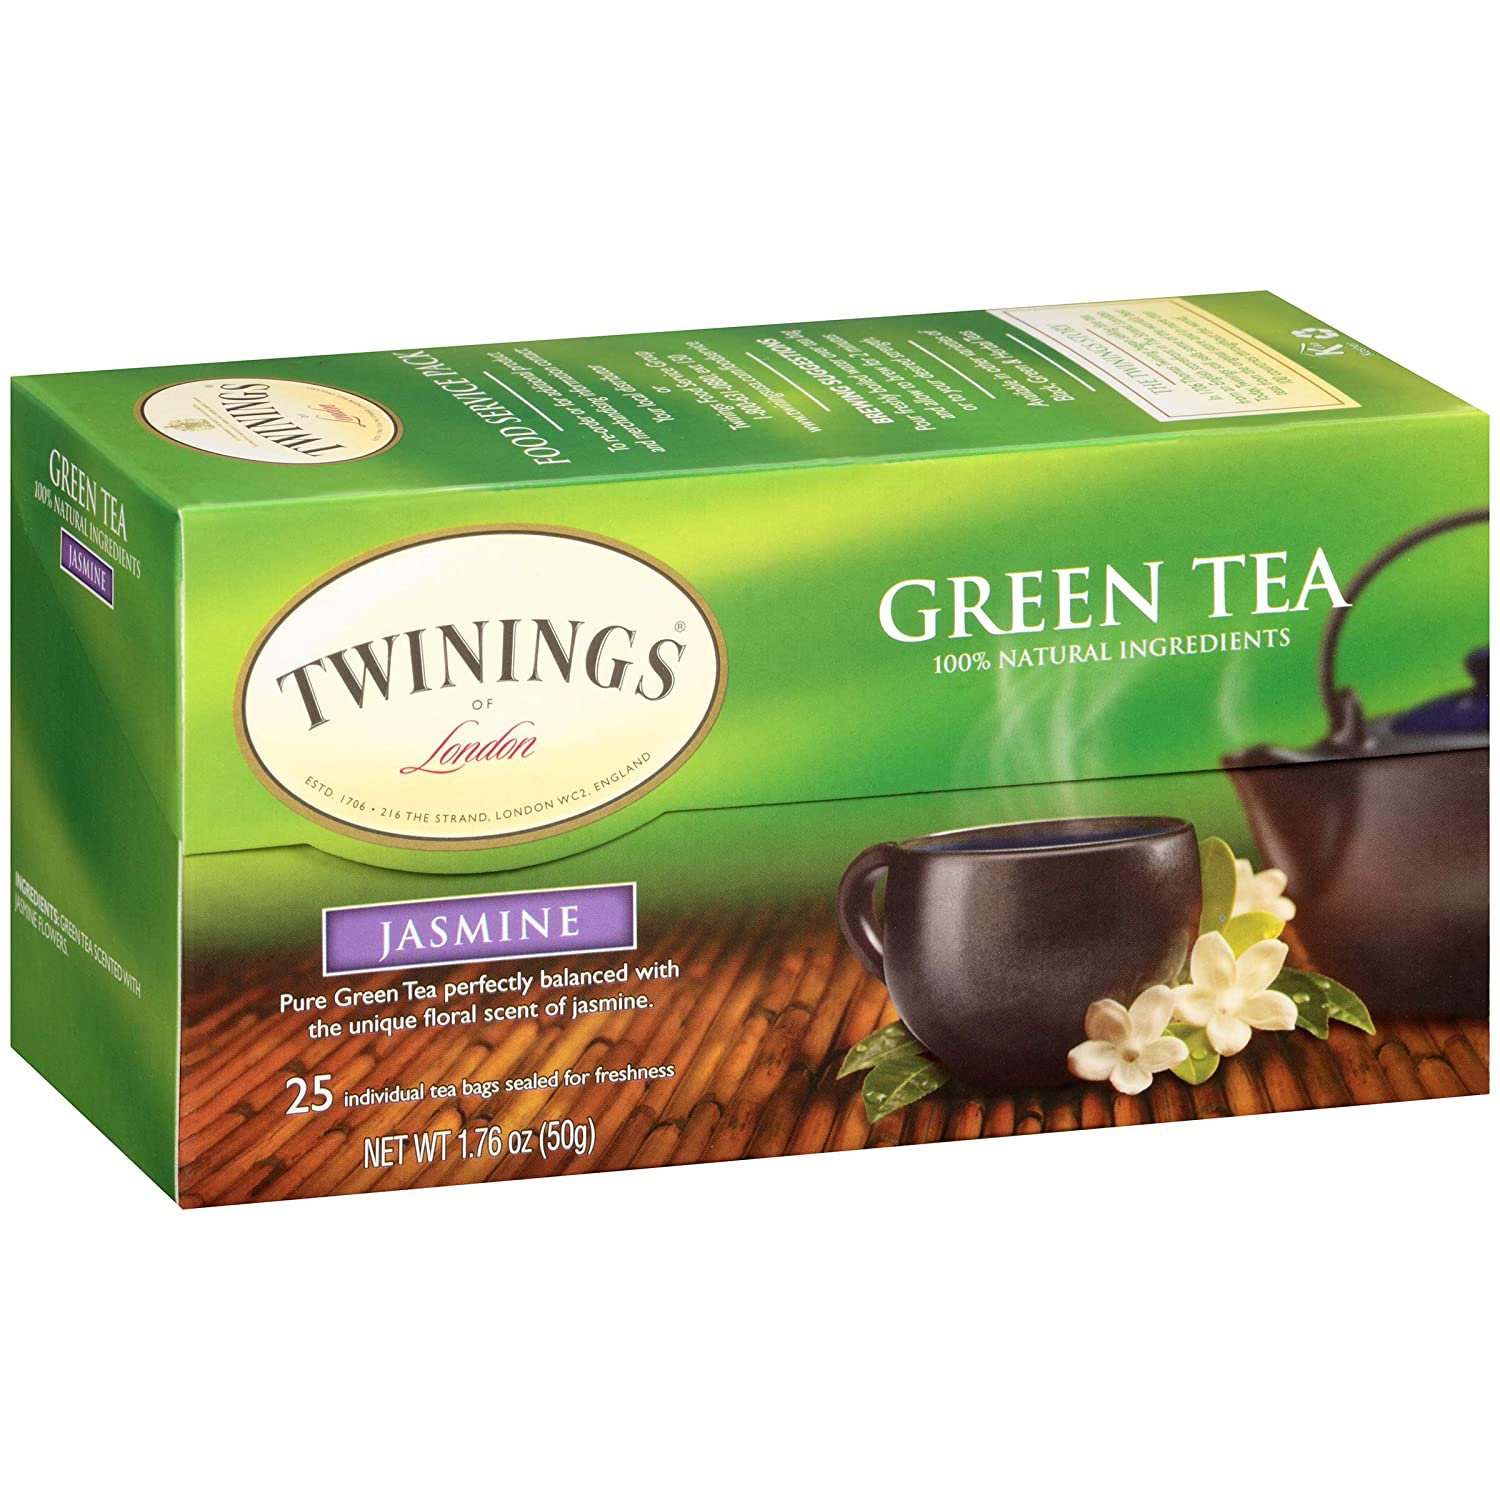 Twinings of London Lapsang Souchong Black Tea Bags, 20 Count (Pack of 6)